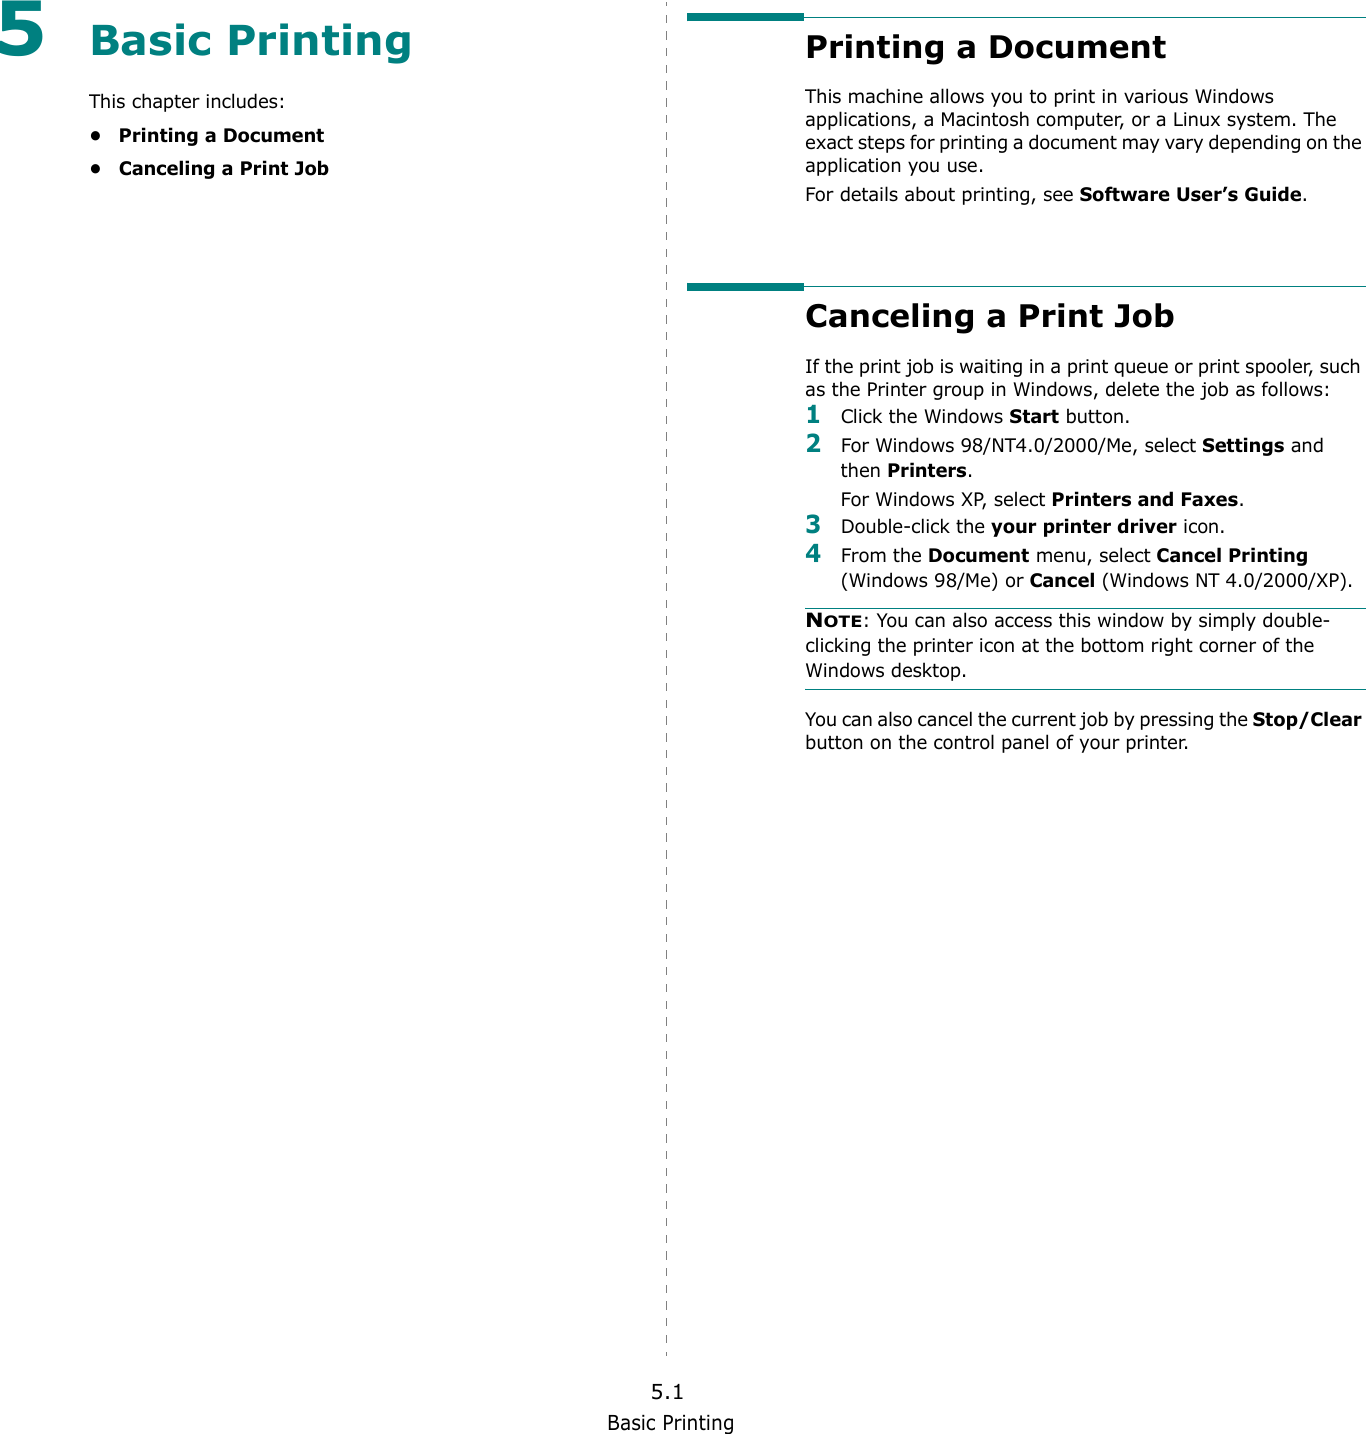 Basic Printing5.15Basic PrintingThis chapter includes:• Printing a Document• Canceling a Print JobPrinting a DocumentThis machine allows you to print in various Windows applications, a Macintosh computer, or a Linux system. The exact steps for printing a document may vary depending on the application you use. For details about printing, see Software User’s Guide. Canceling a Print JobIf the print job is waiting in a print queue or print spooler, such as the Printer group in Windows, delete the job as follows:1Click the Windows Start button. 2For Windows 98/NT4.0/2000/Me, select Settings and then Printers.For Windows XP, select Printers and Faxes. 3Double-click the your printer driver icon. 4From the Document menu, select Cancel Printing (Windows 98/Me) or Cancel (Windows NT 4.0/2000/XP).NOTE: You can also access this window by simply double-clicking the printer icon at the bottom right corner of the Windows desktop.You can also cancel the current job by pressing the Stop/Clear button on the control panel of your printer.